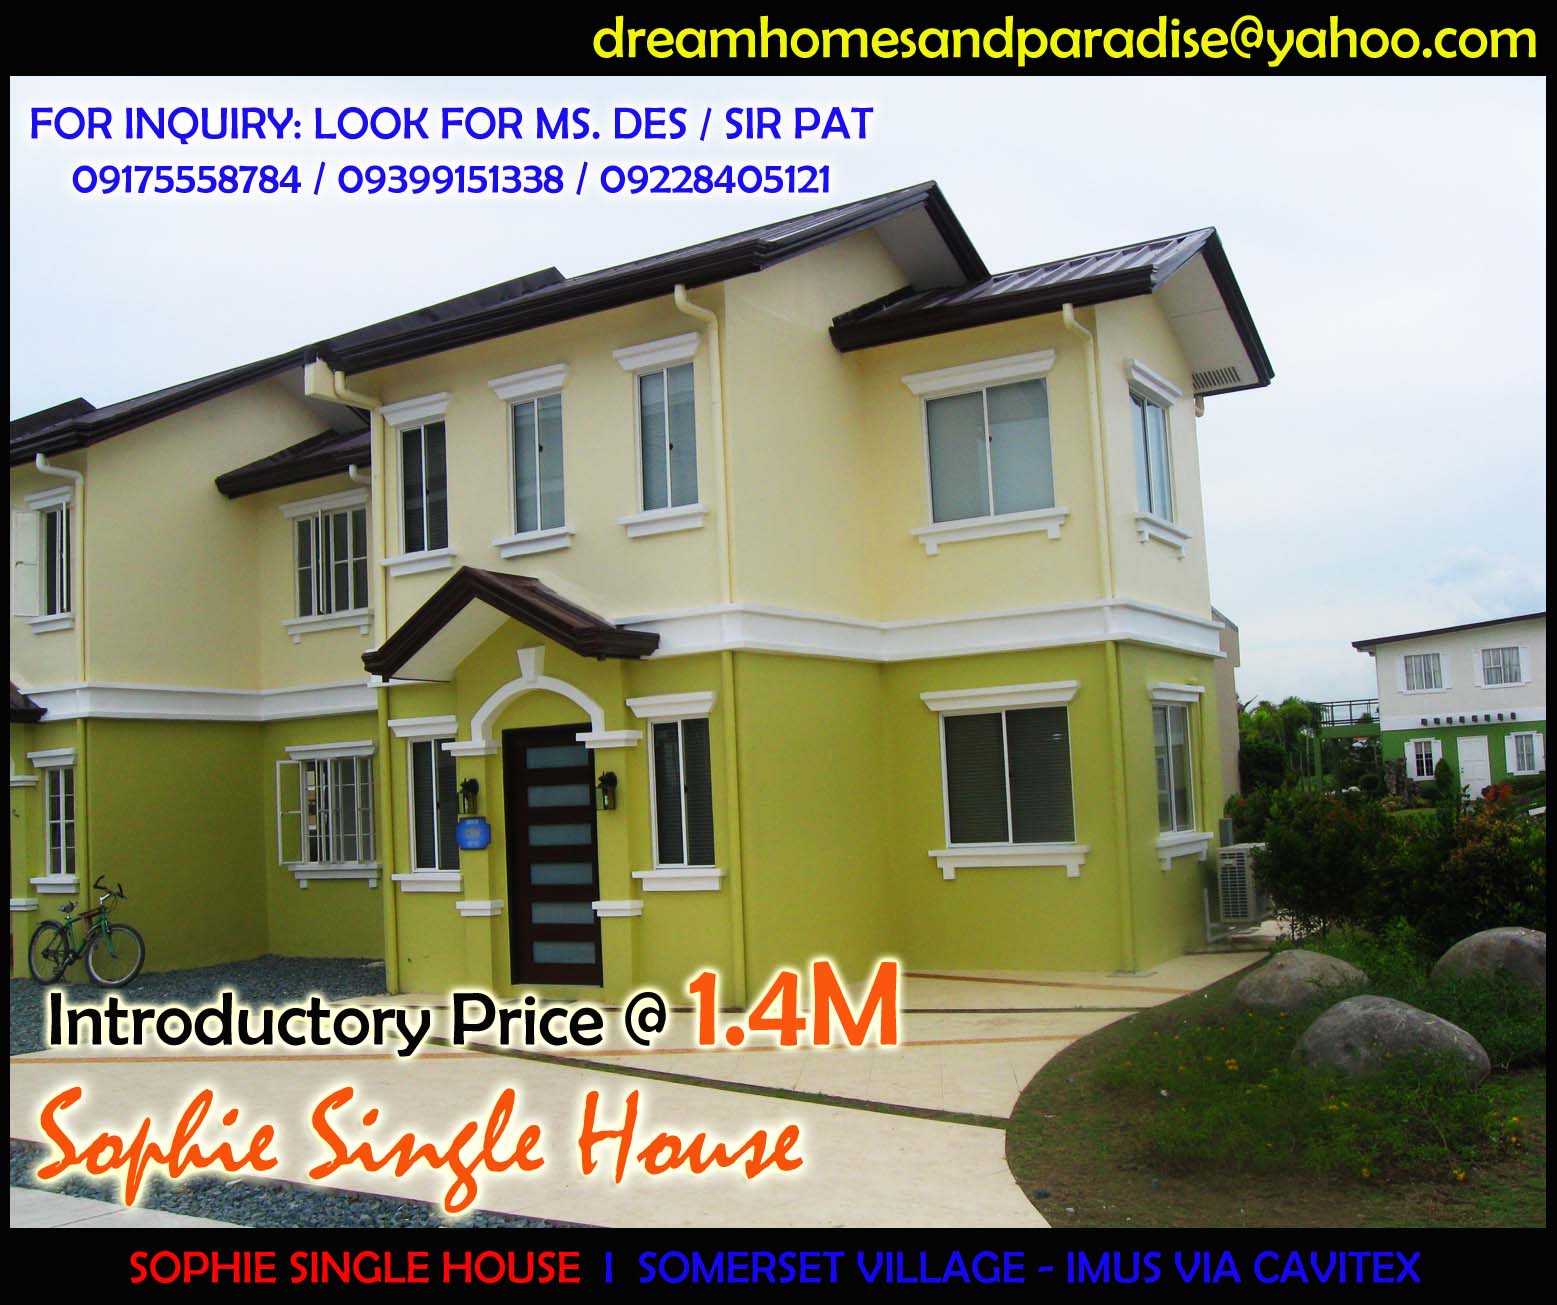 SOPHIE SINGLE HOUSE 15 MINS TO AIRPORT FOR ONLY 10K MONTHLY